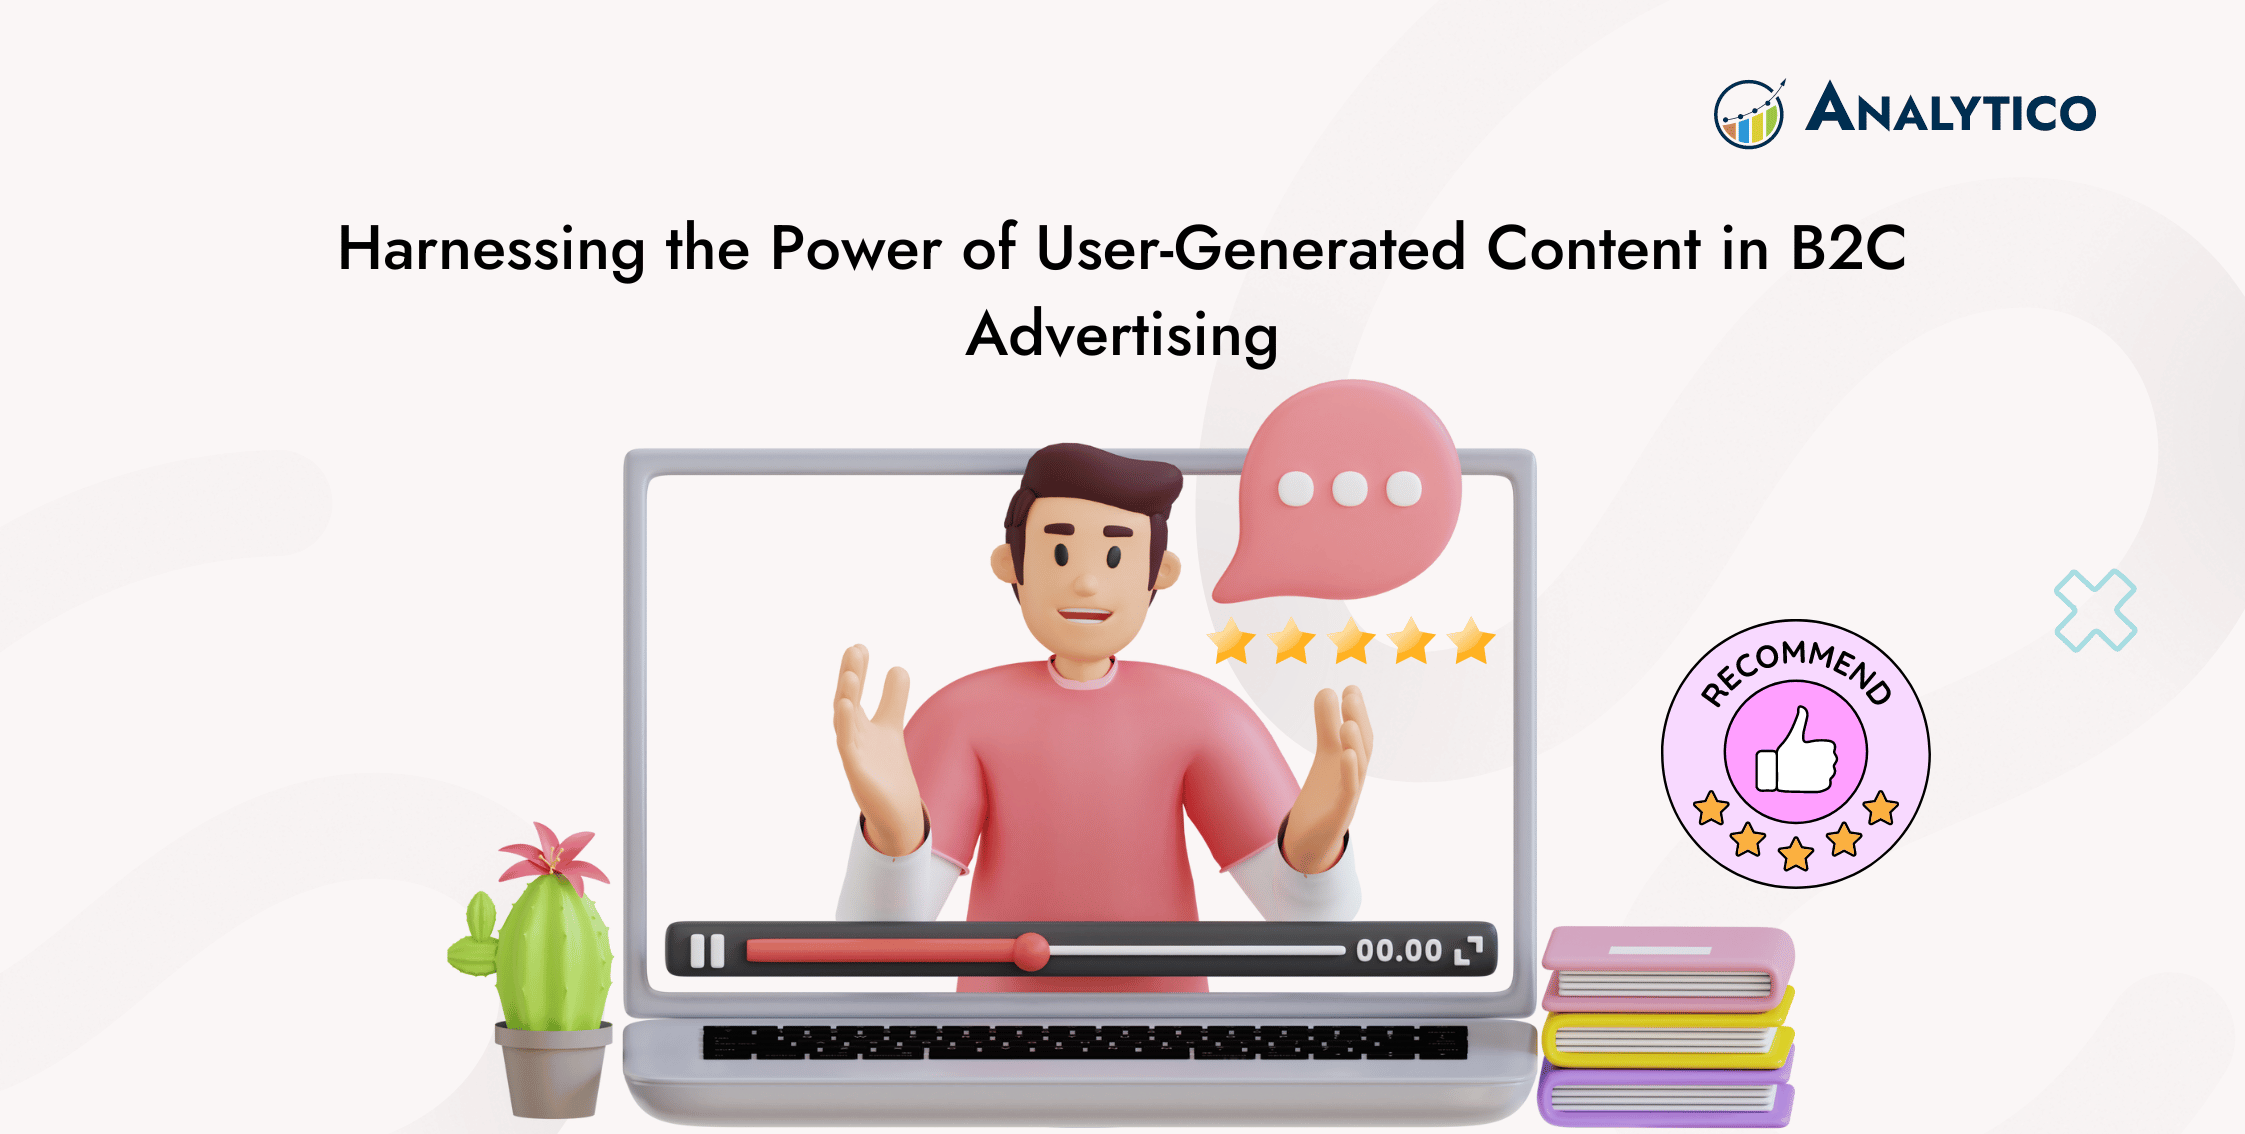 Harnessing the Power of User-Generated Content in B2C Advertising